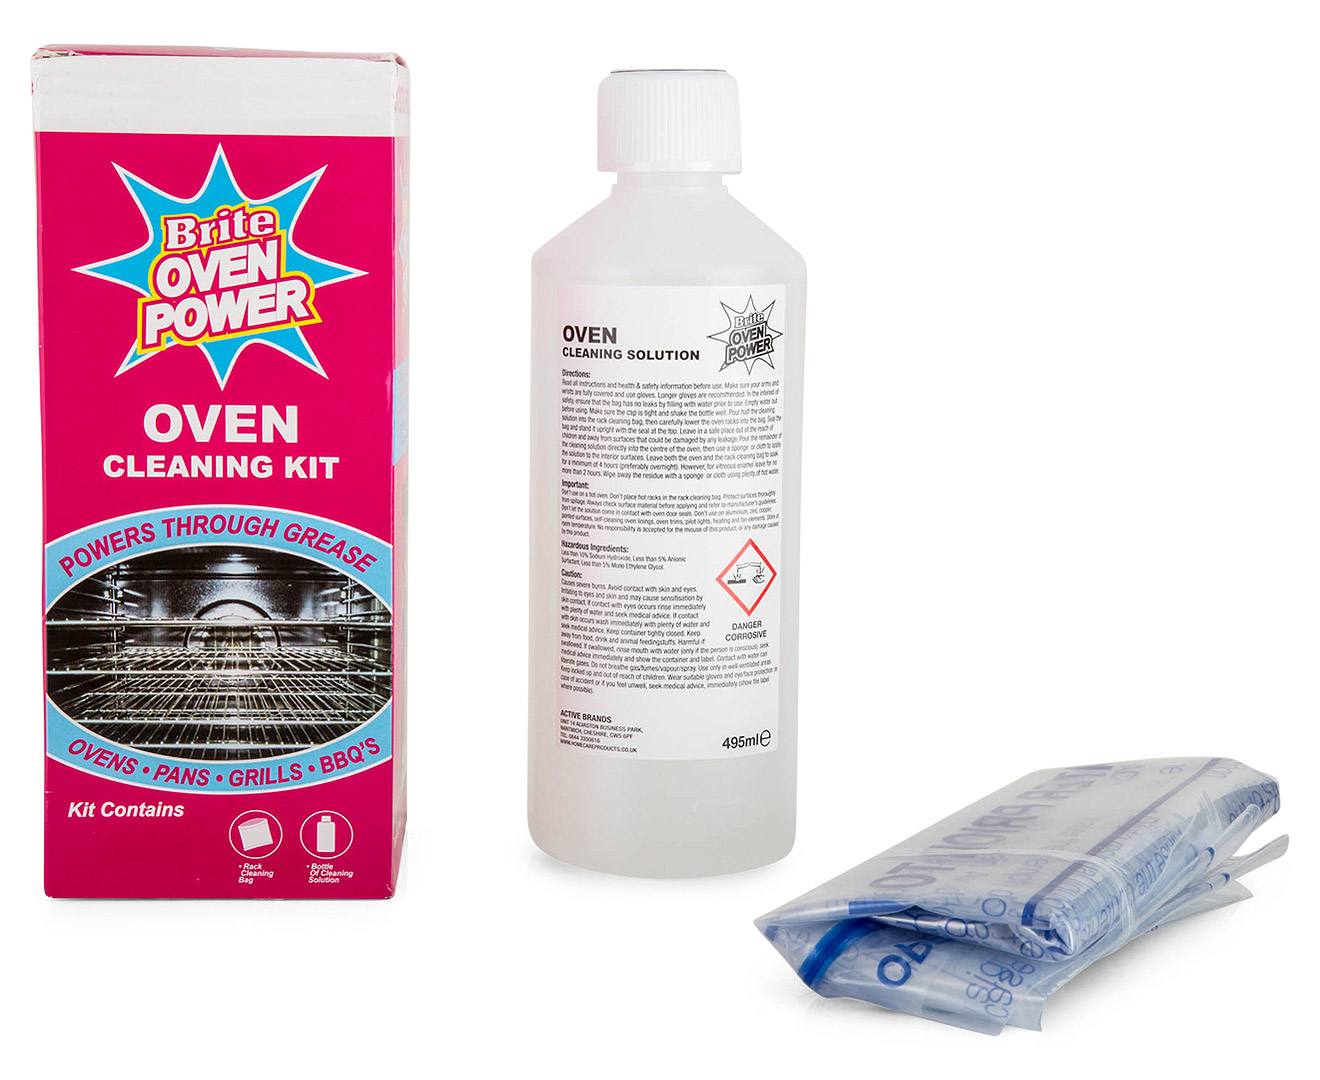 oven brite oven cleaning kit instructions